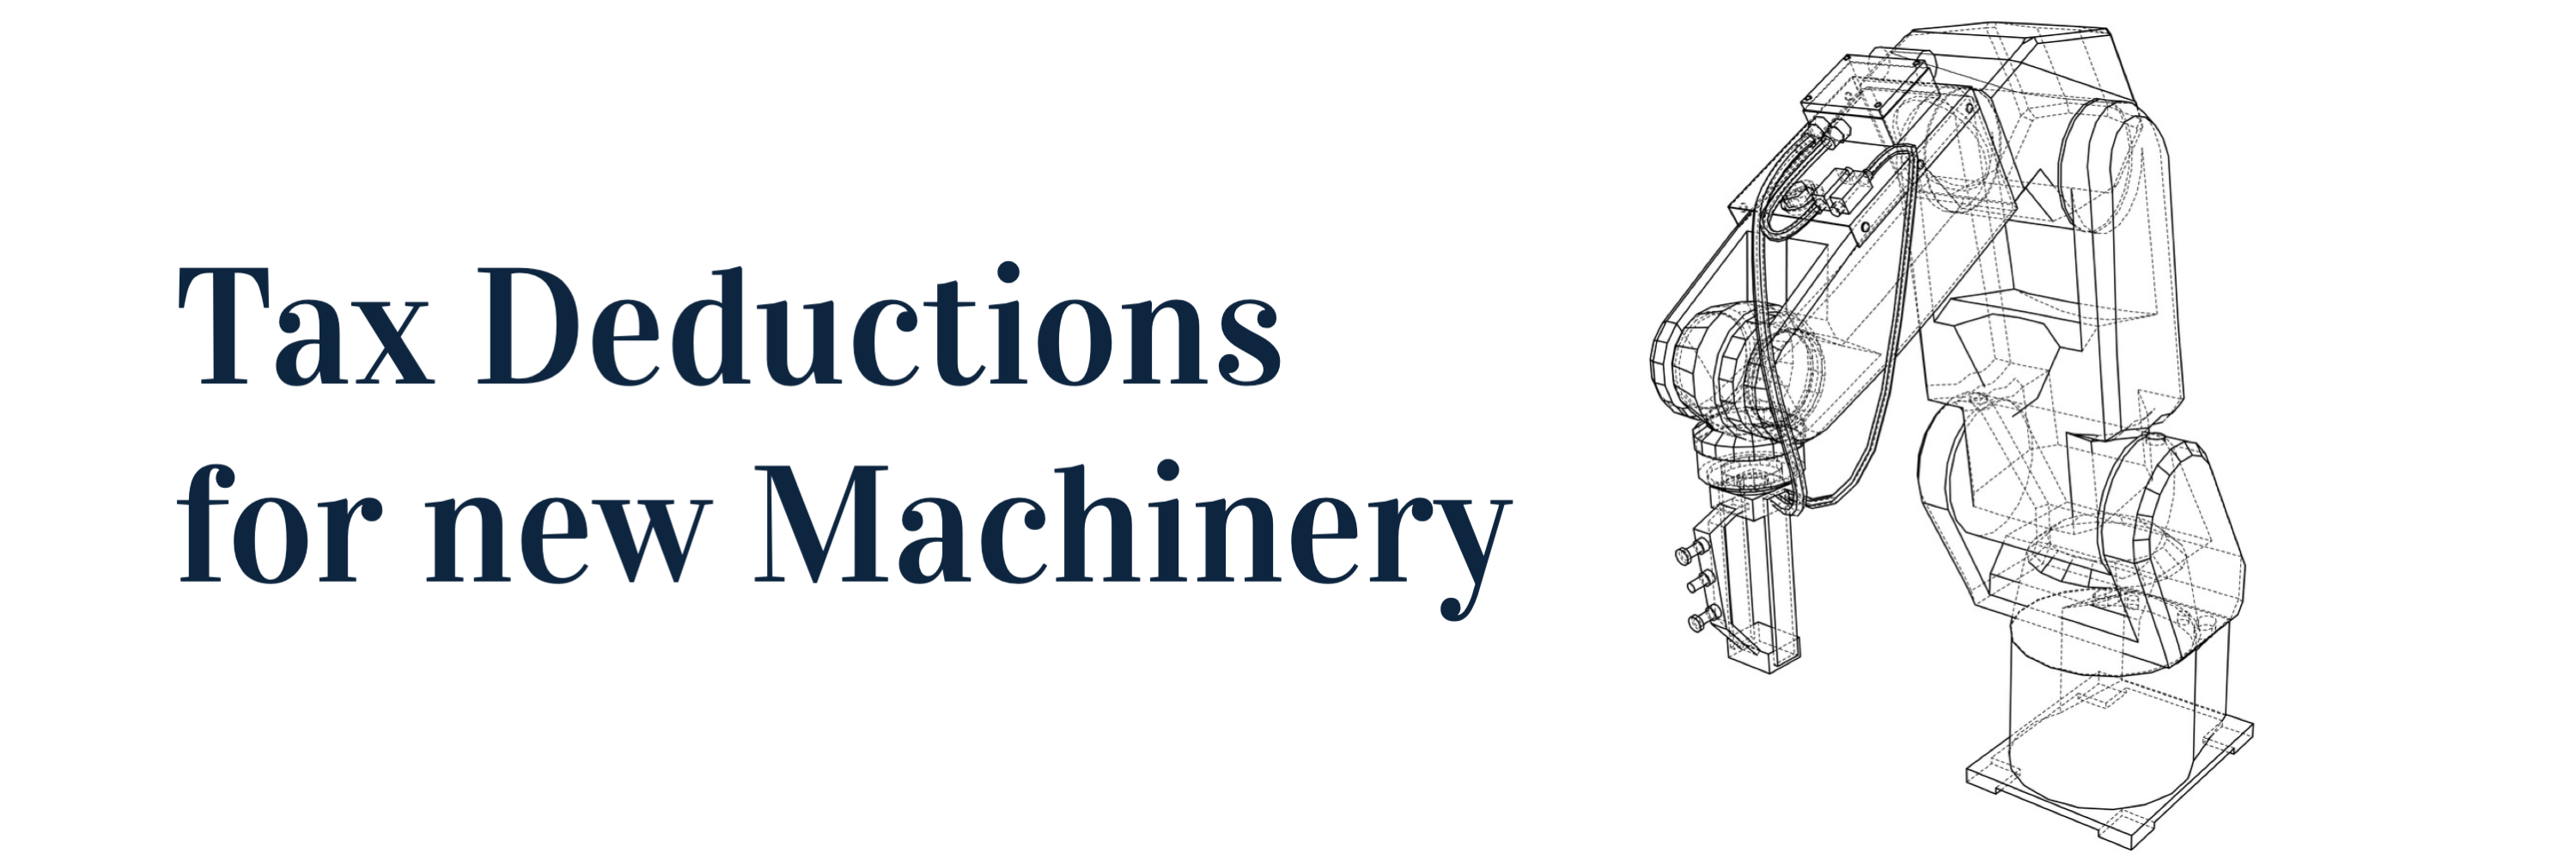 MPG Tax Deductions for new Machinery